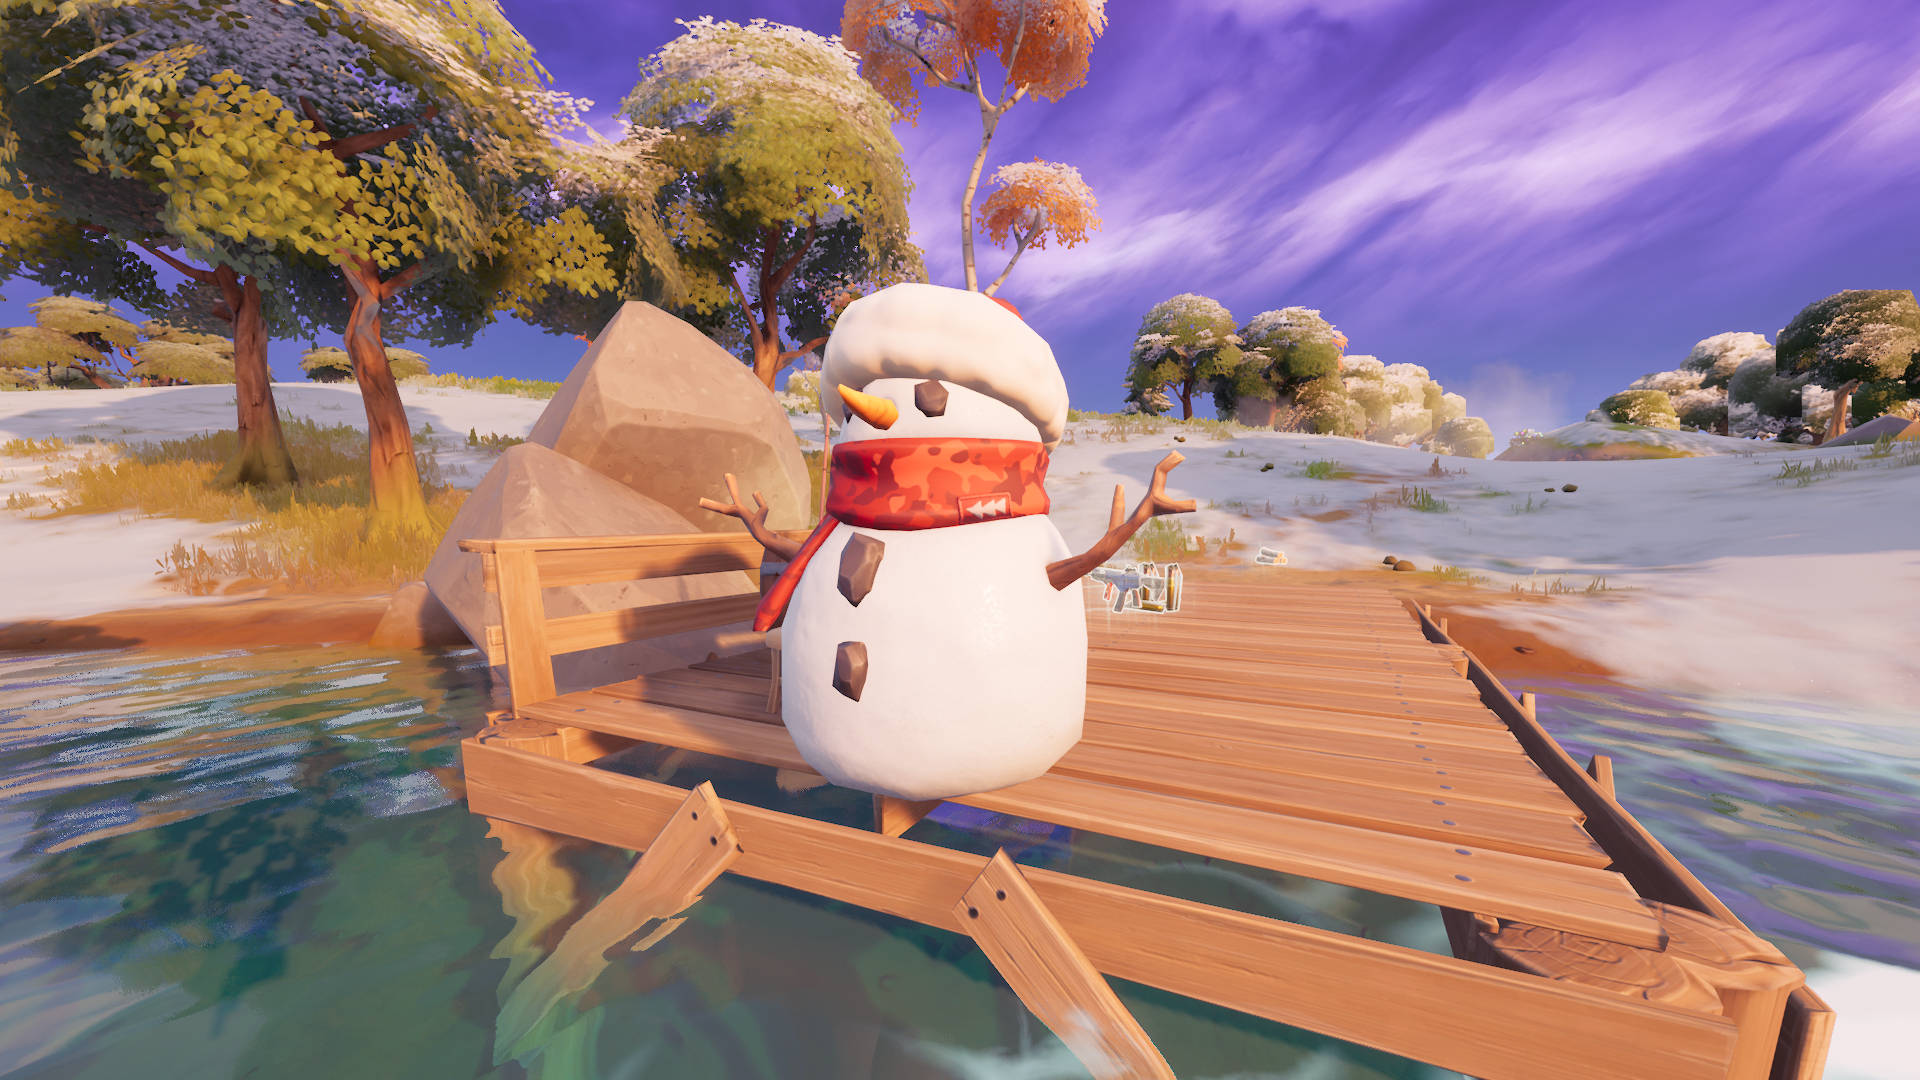 Where to ram a snowman with a vehicle in Fortnite